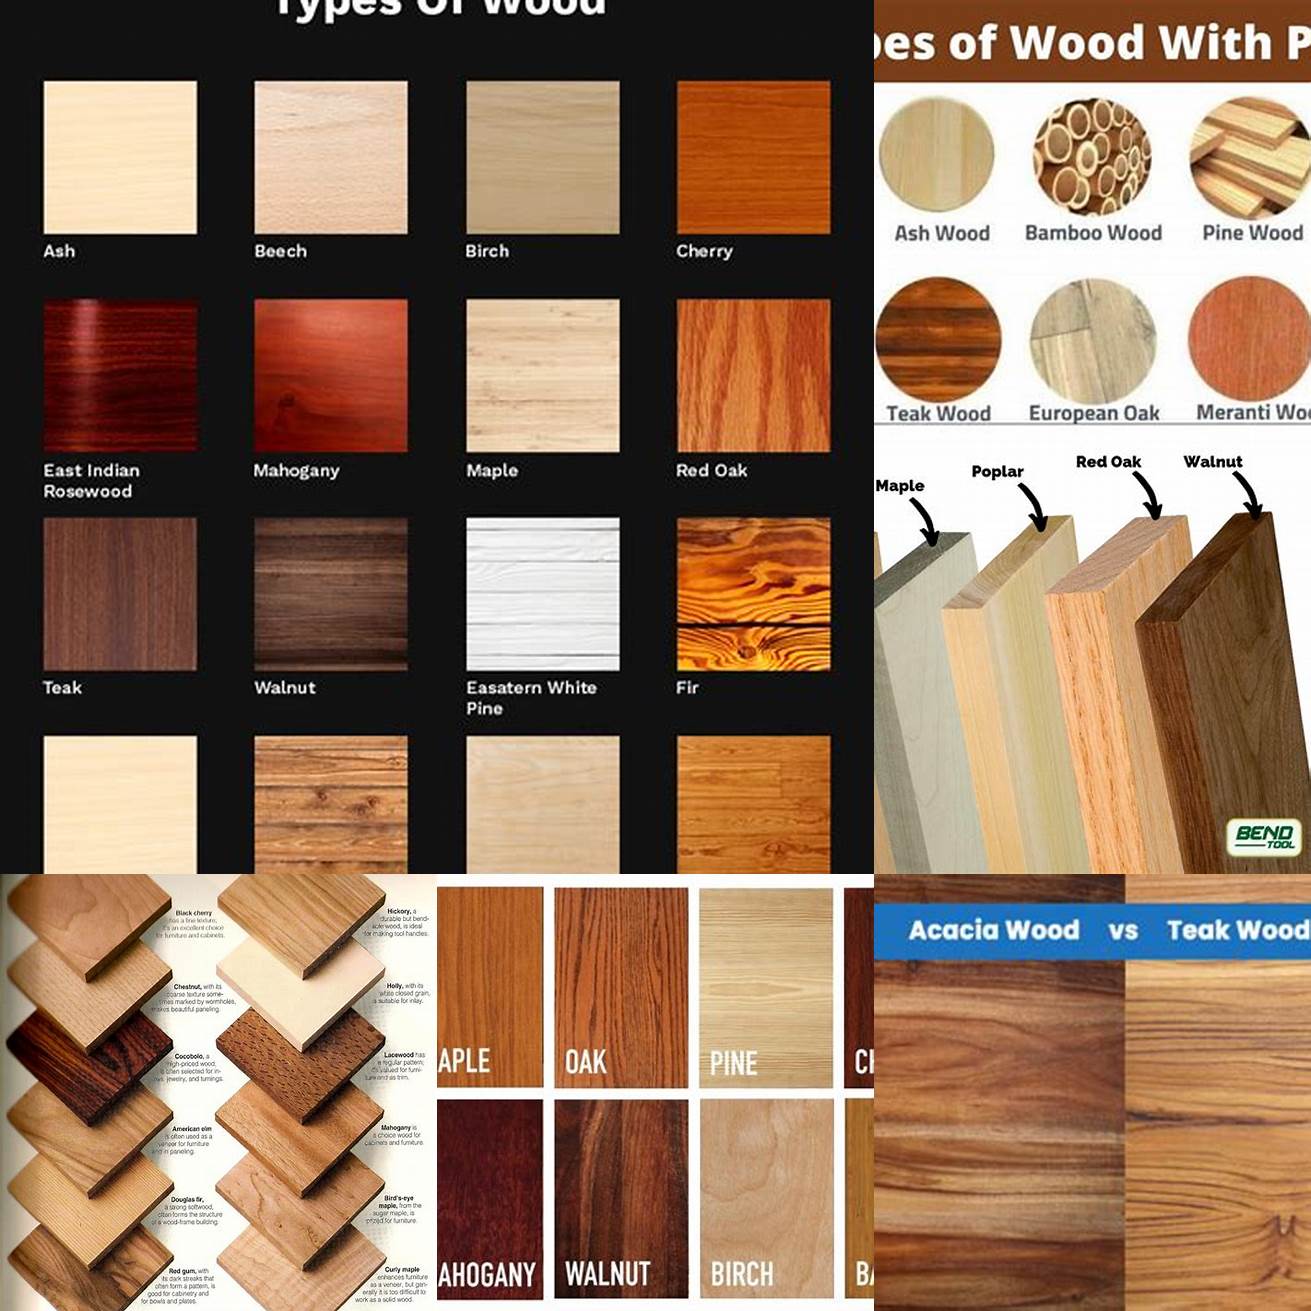 Comparison of teak wood to other types of wood